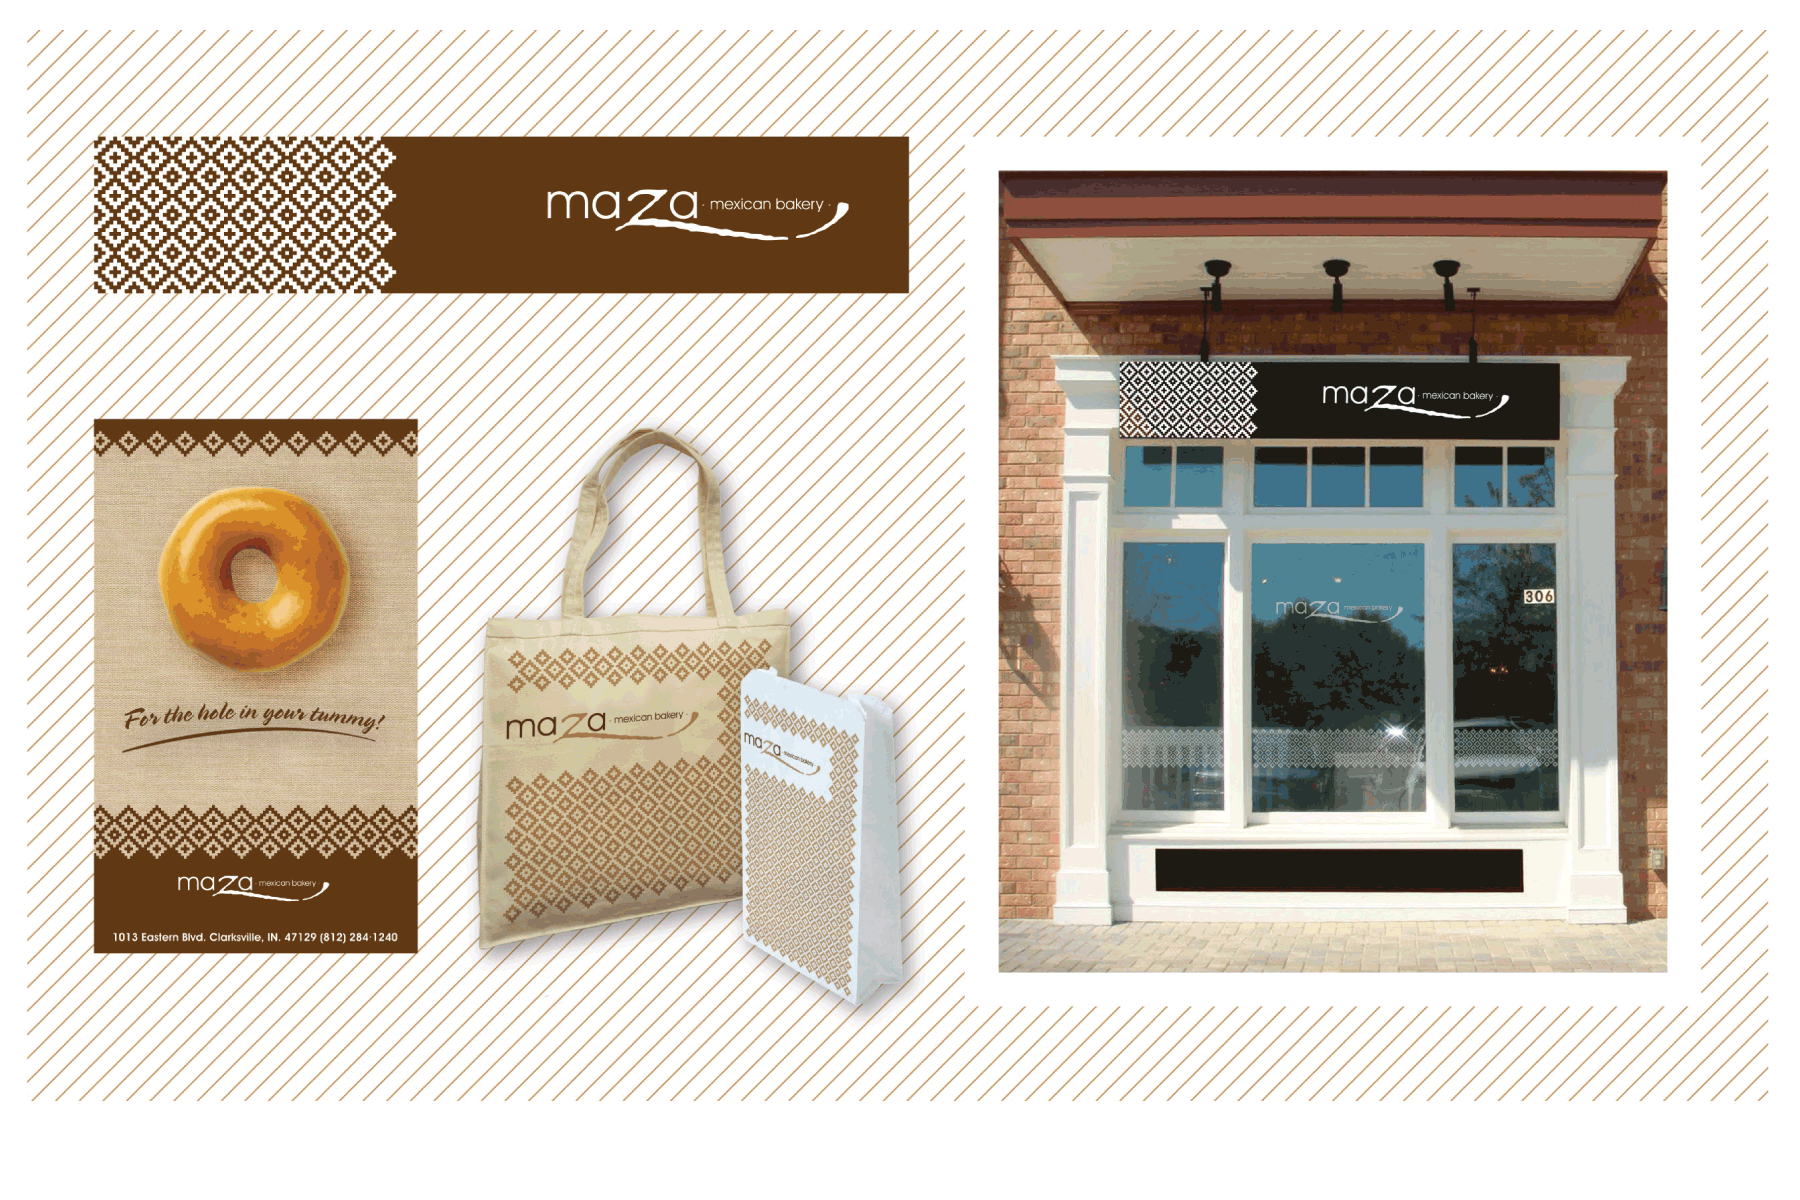 Maza Mexican Bakery - Collateral